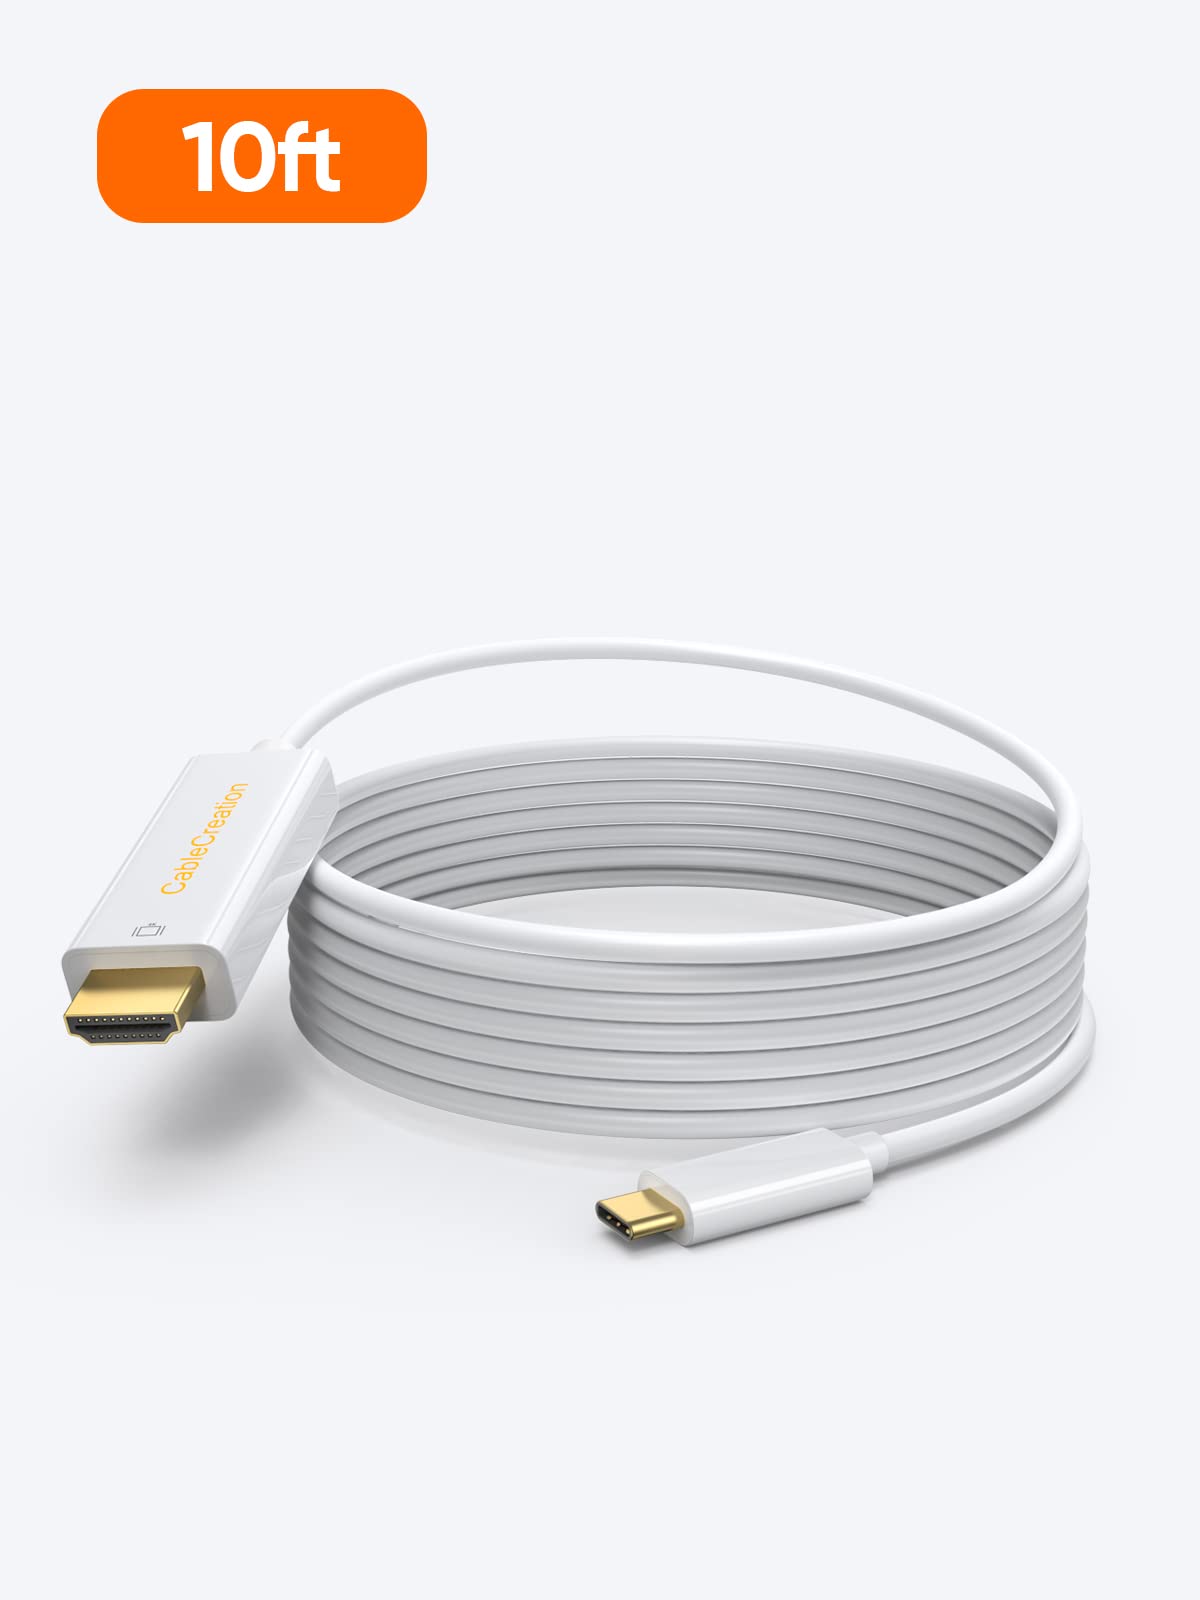 CableCreation Long USB C to HDMI Cable 10FT 4K@30Hz Compatible with Thunderbolt 3/4 for Home Office, Male to Male Type C HDMI Cable, White